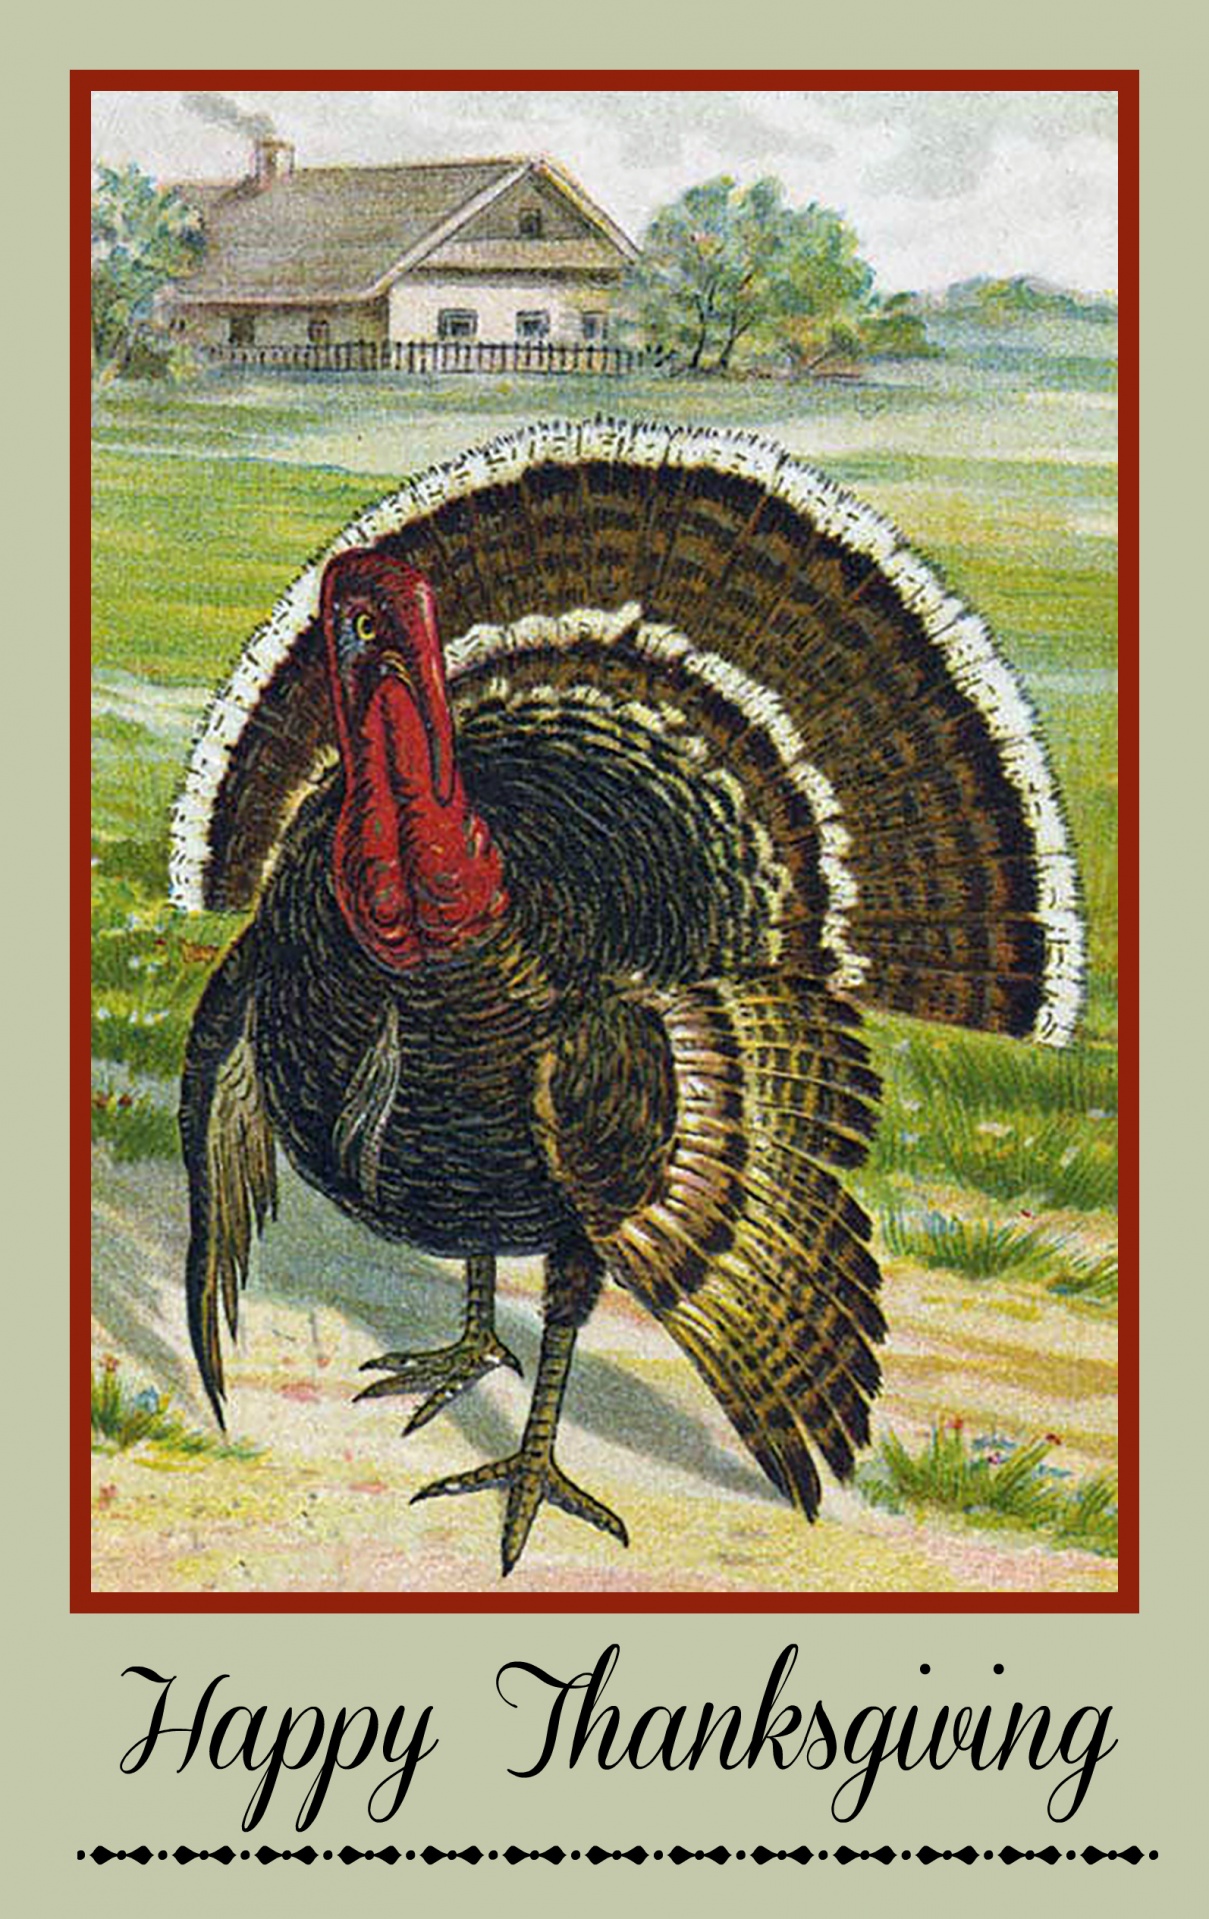 vintage poster for Thanksgiving featuring a turkey